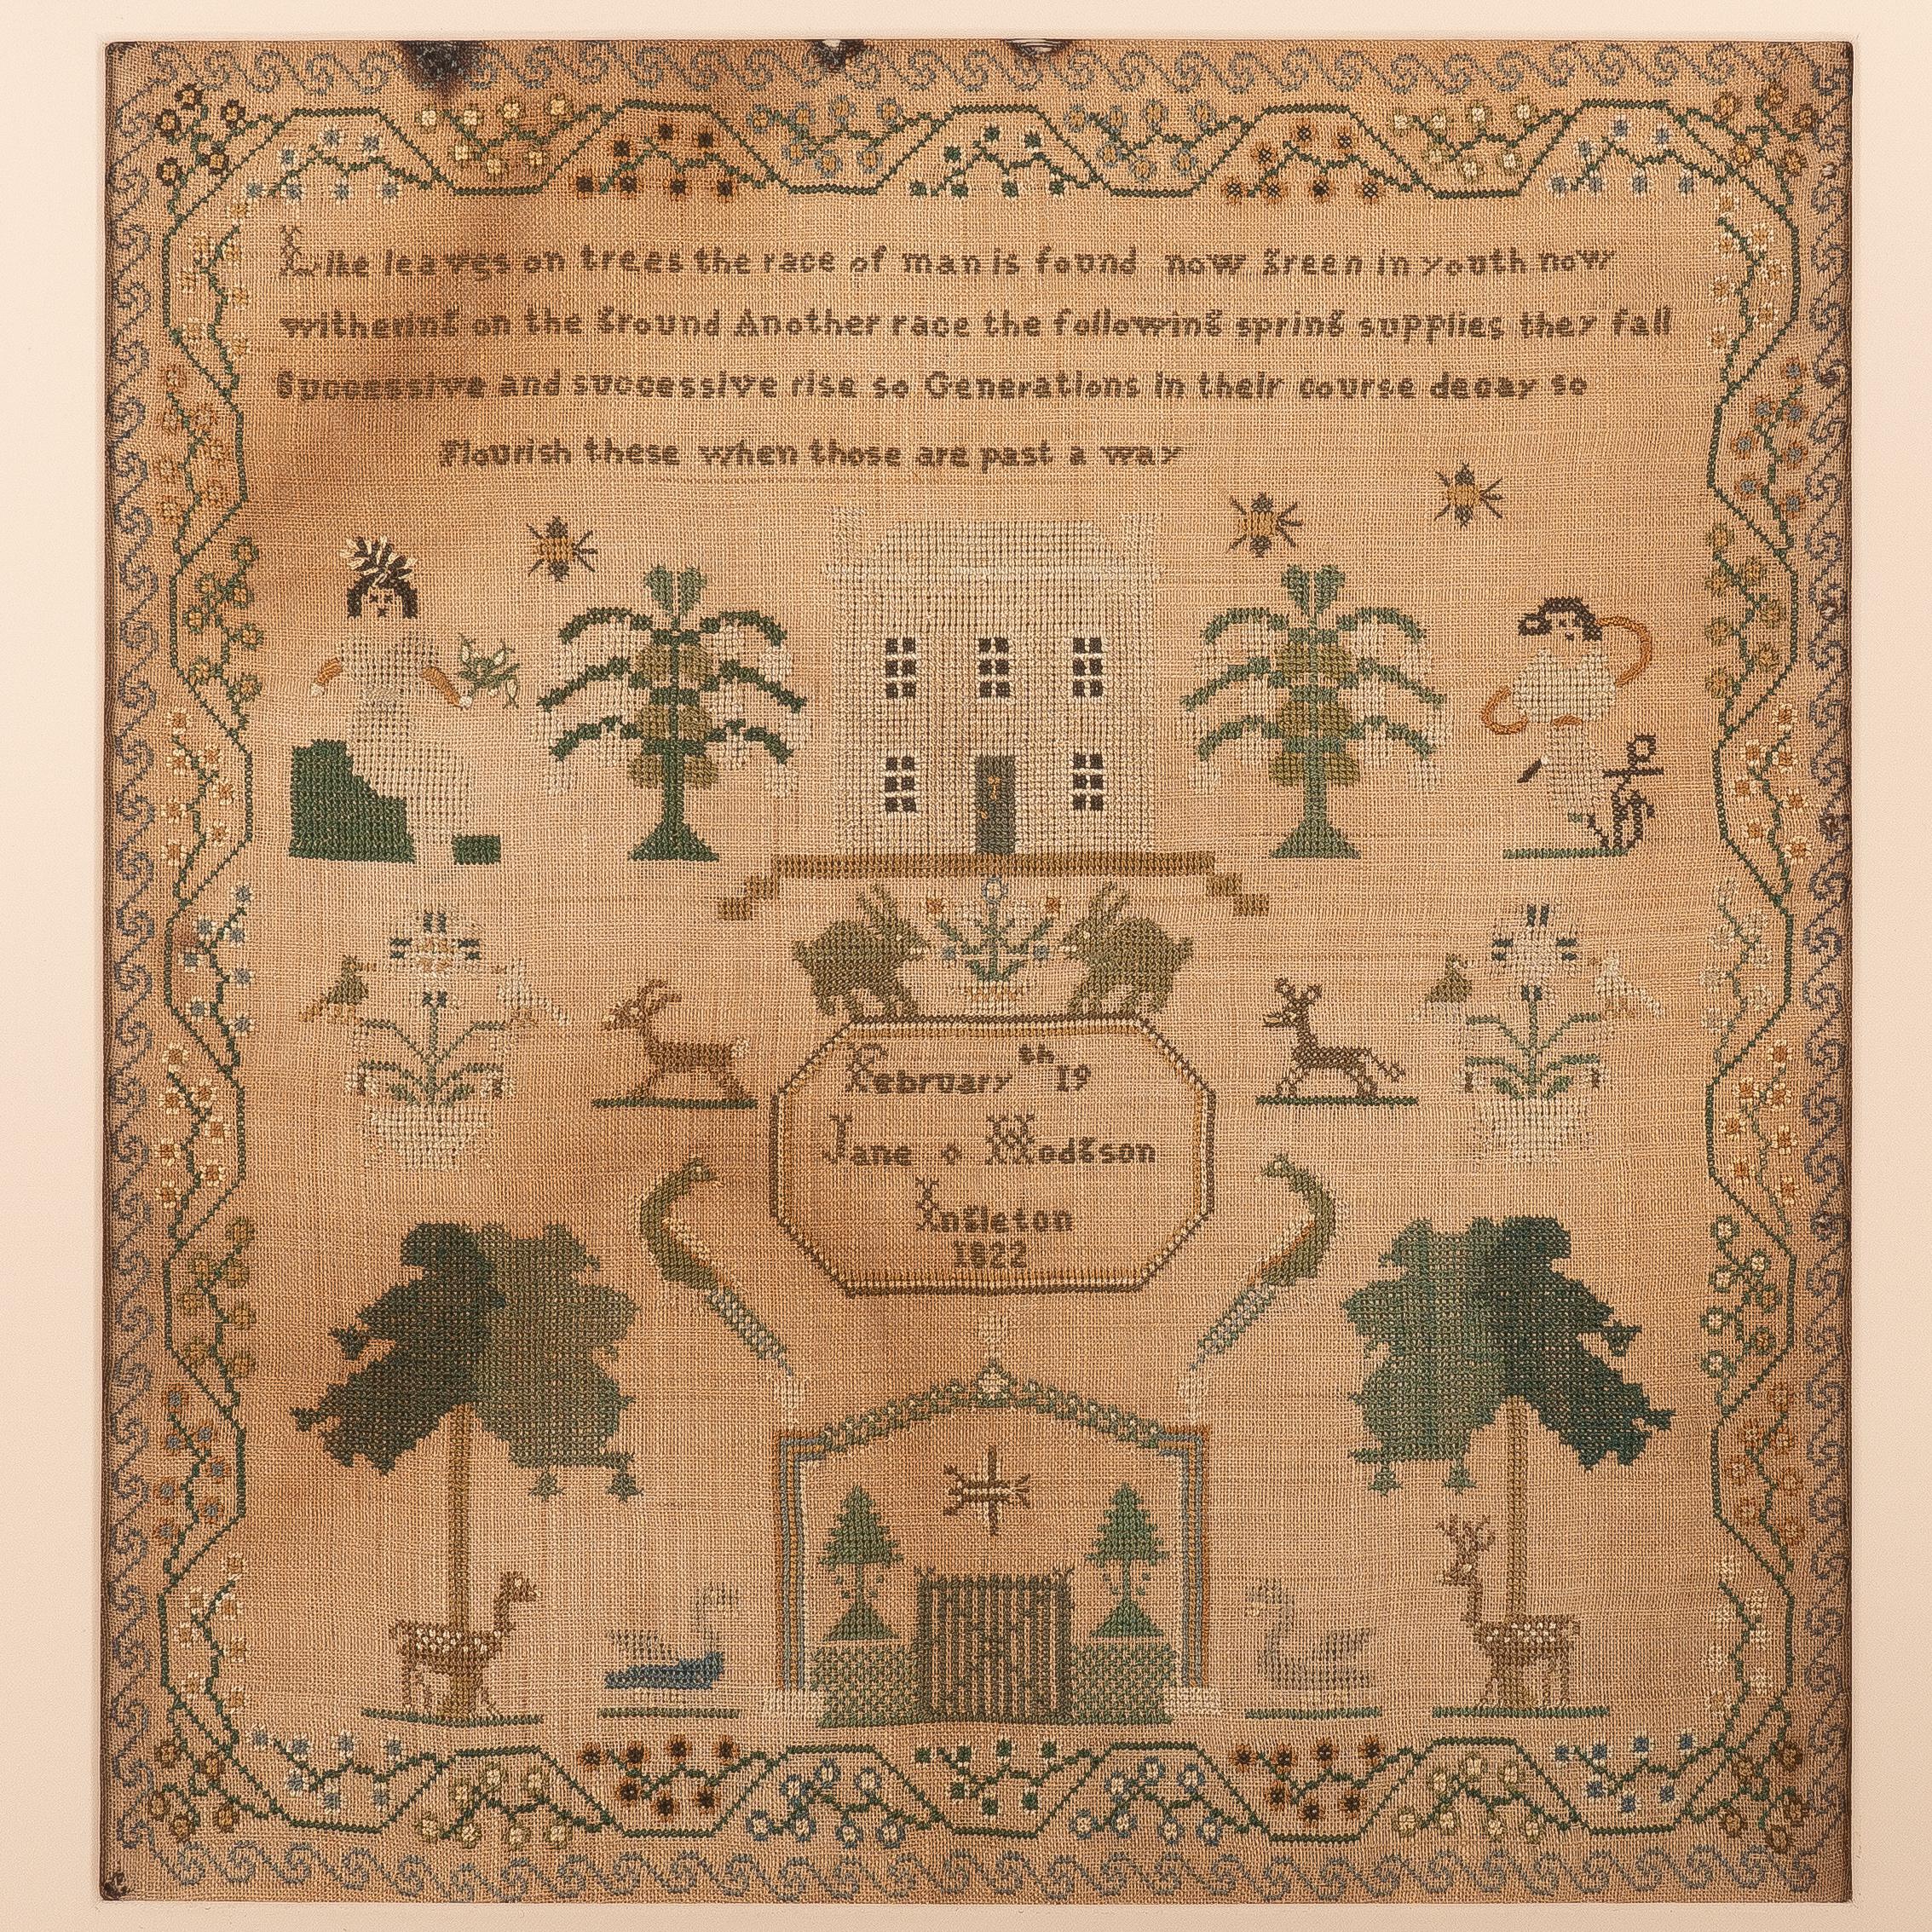 Needlework sampler of silk floss on linen in green, brown, and white on a natural linen ground. The work includes the lines: “Like leaves on the trees the race of man is found now green in youth now withering on the ground. Another race following